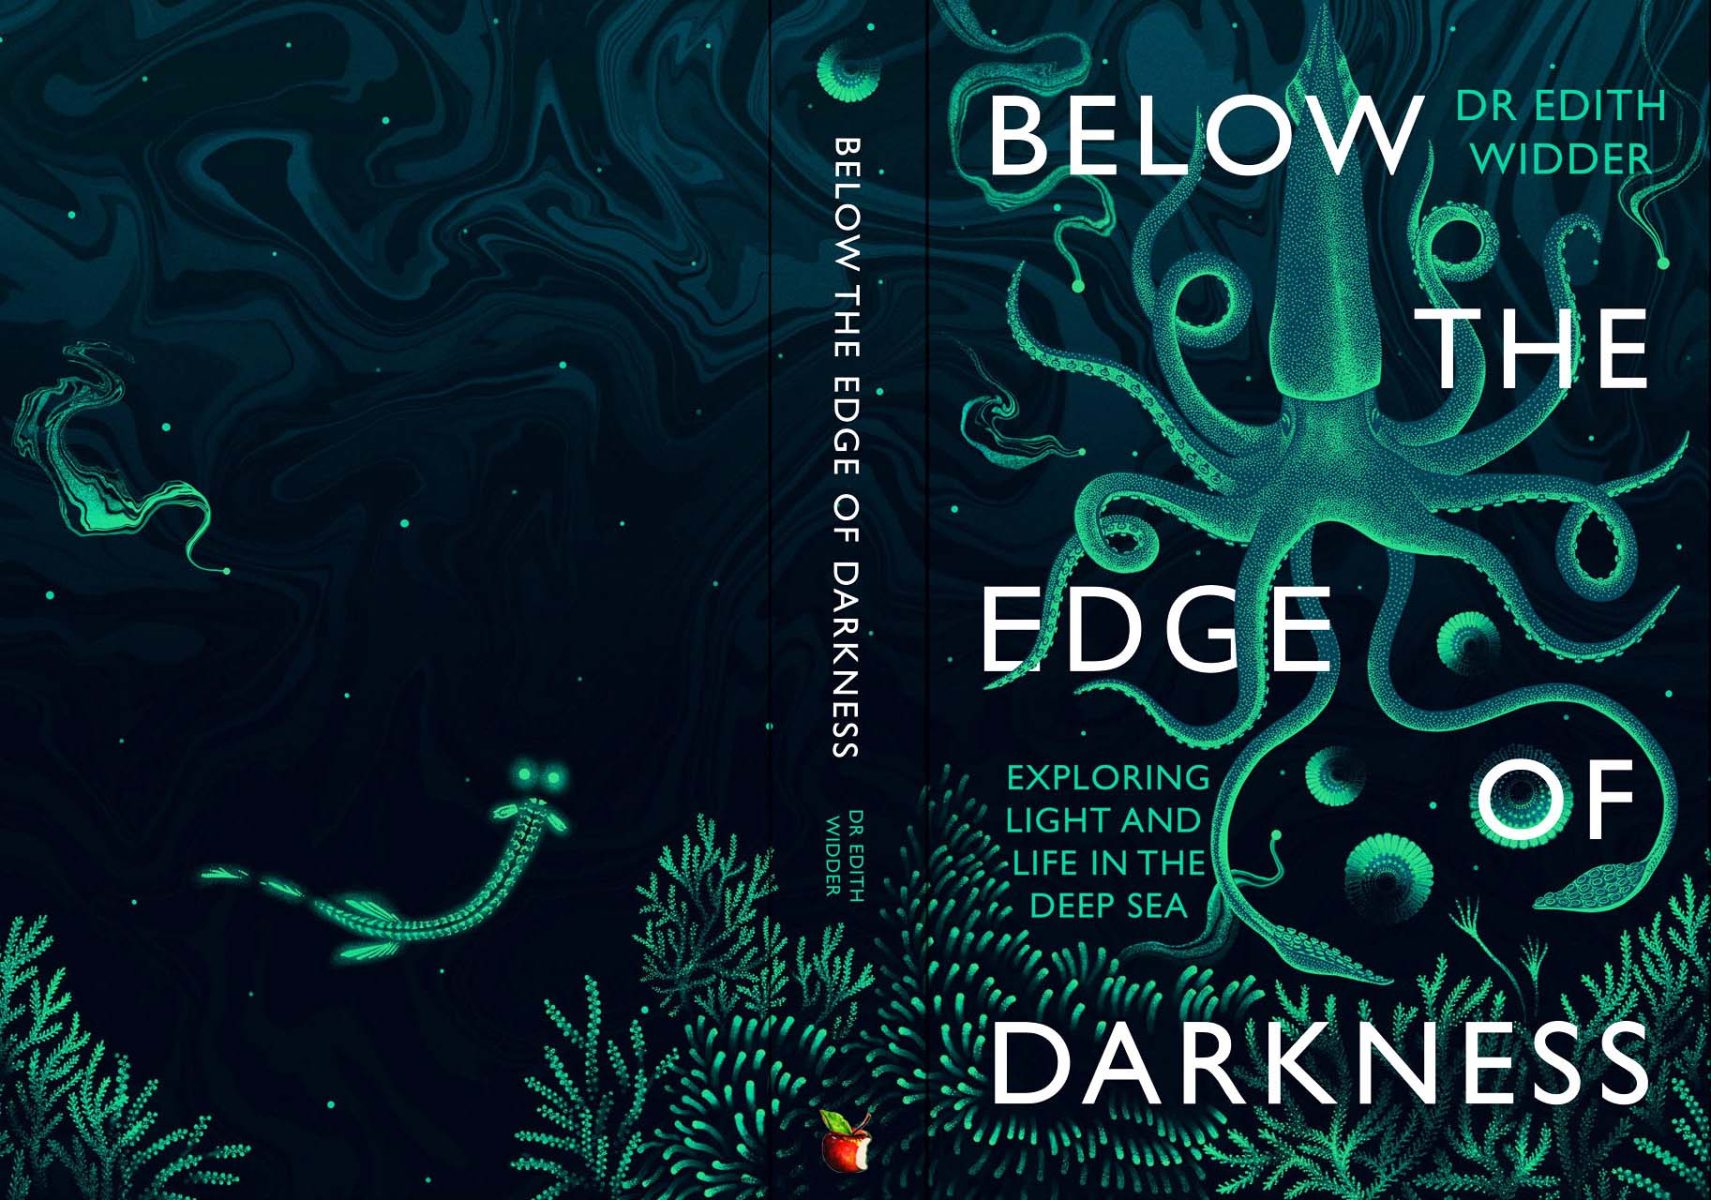 Cover of Below the Edge of Darkness by Edith Widder, Illustration by Jennifer N. R. Smith | WonderTheory